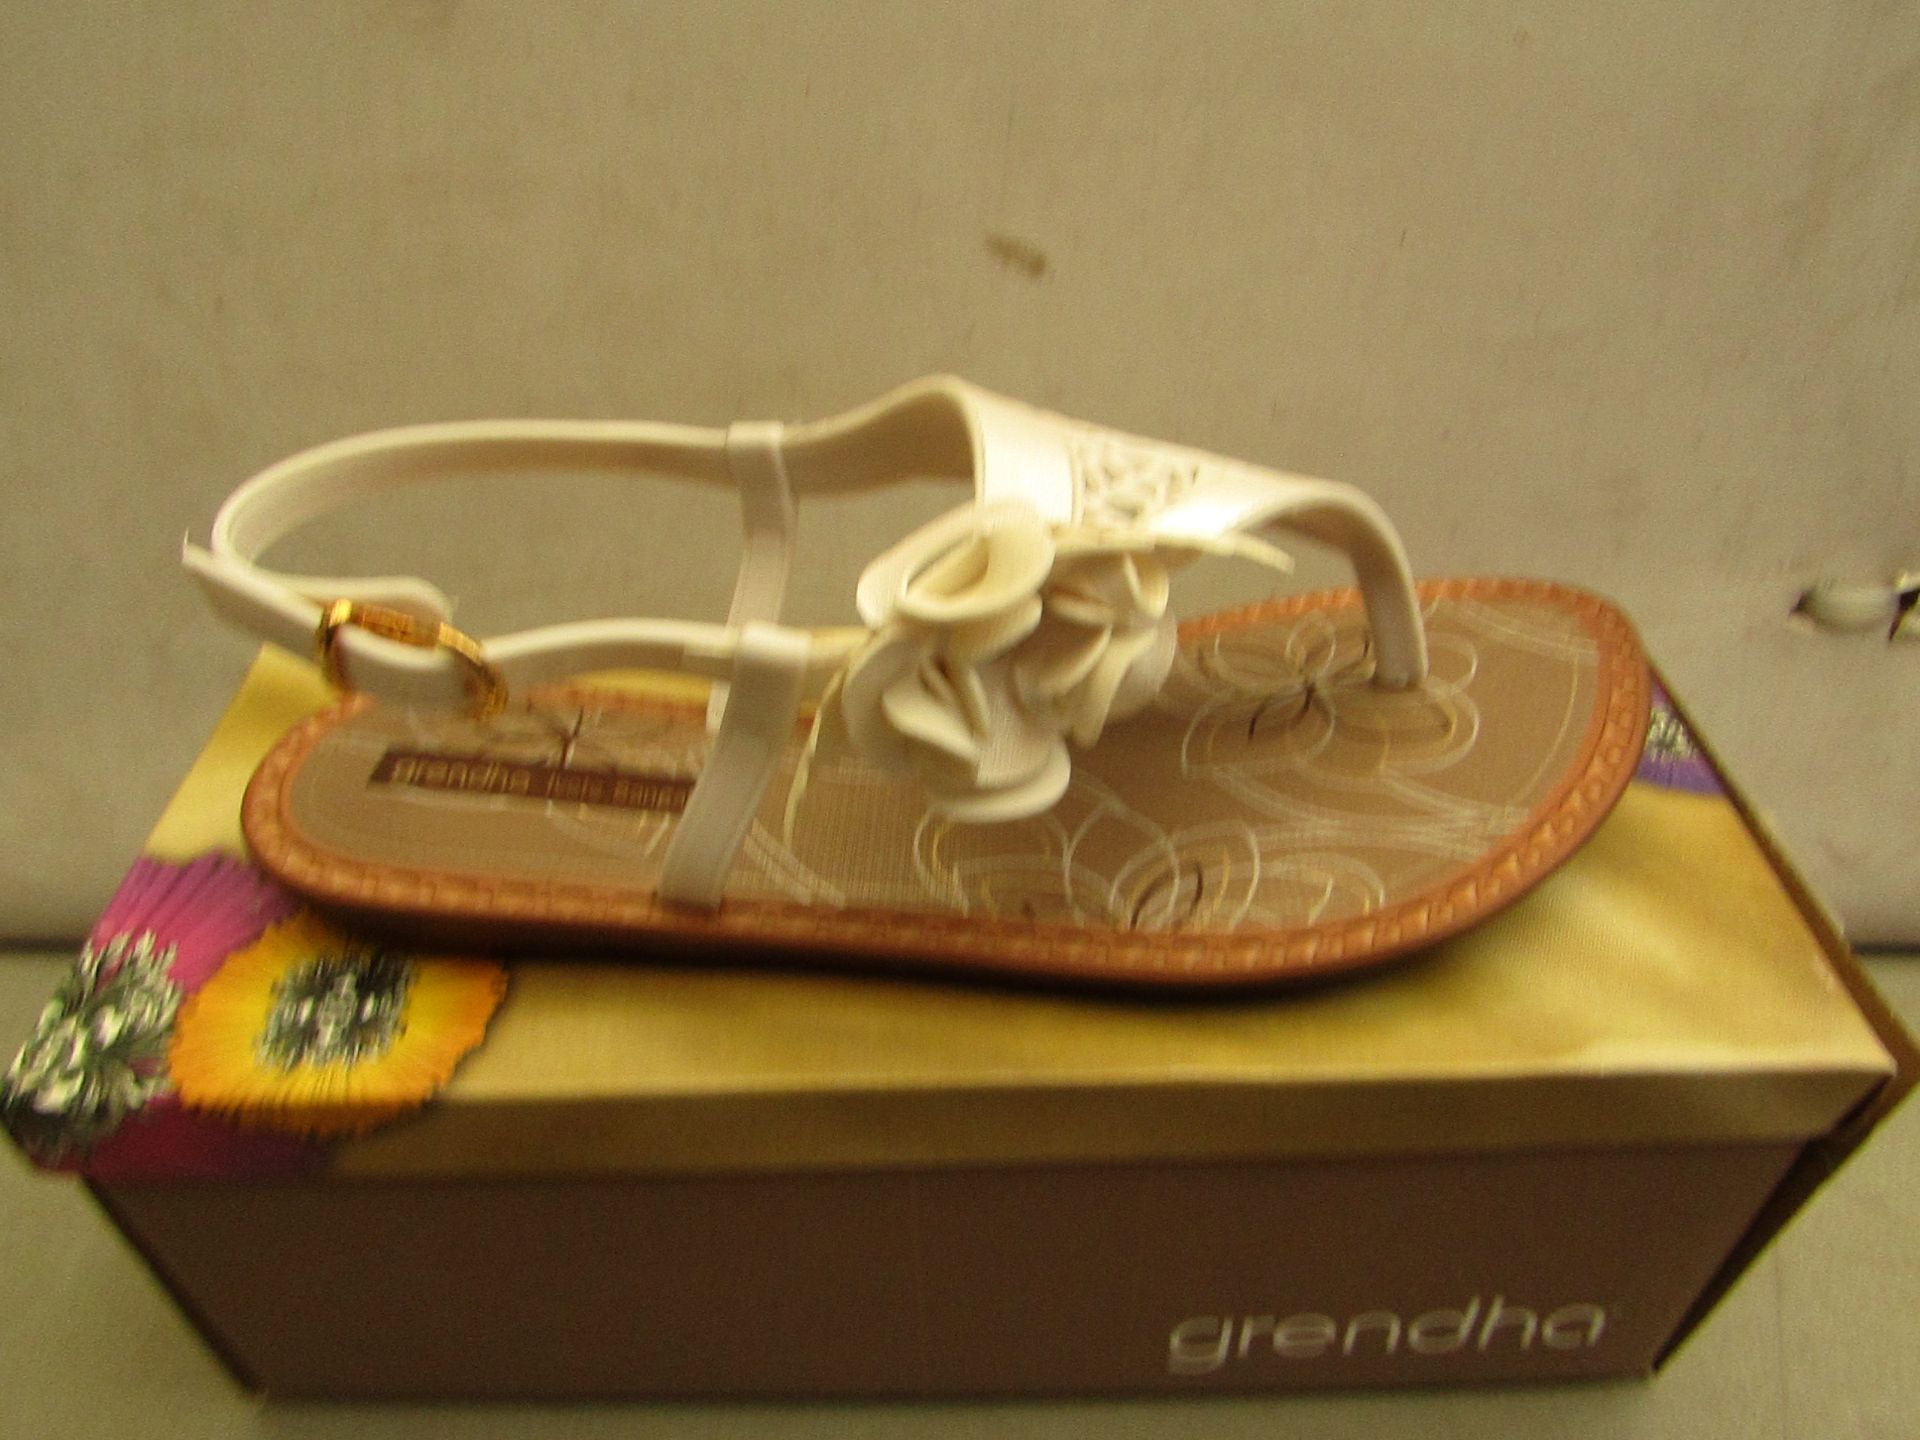 Grendha ladies sandals Shoes size 5 new & boxed see image for design